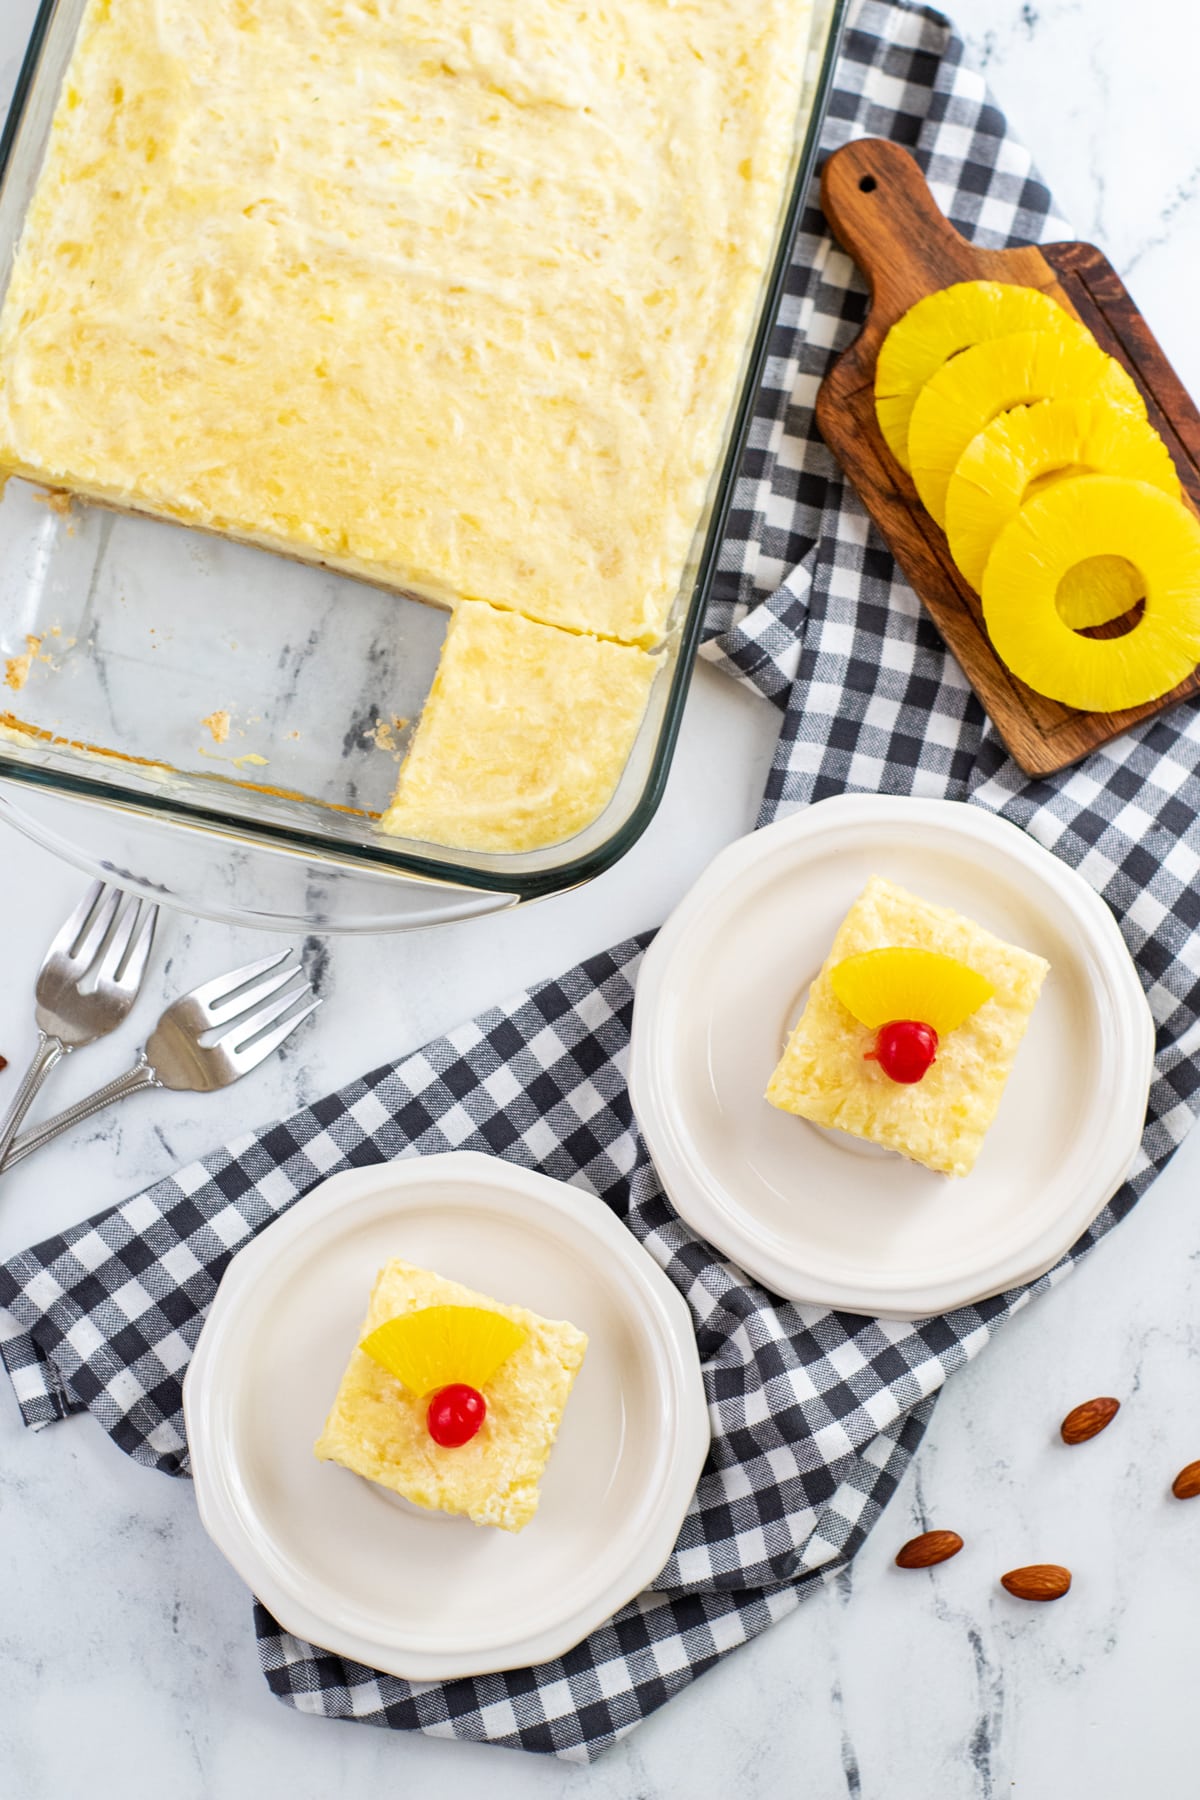 Pineapple Cheesecake Bars on a white plate with checkered linen